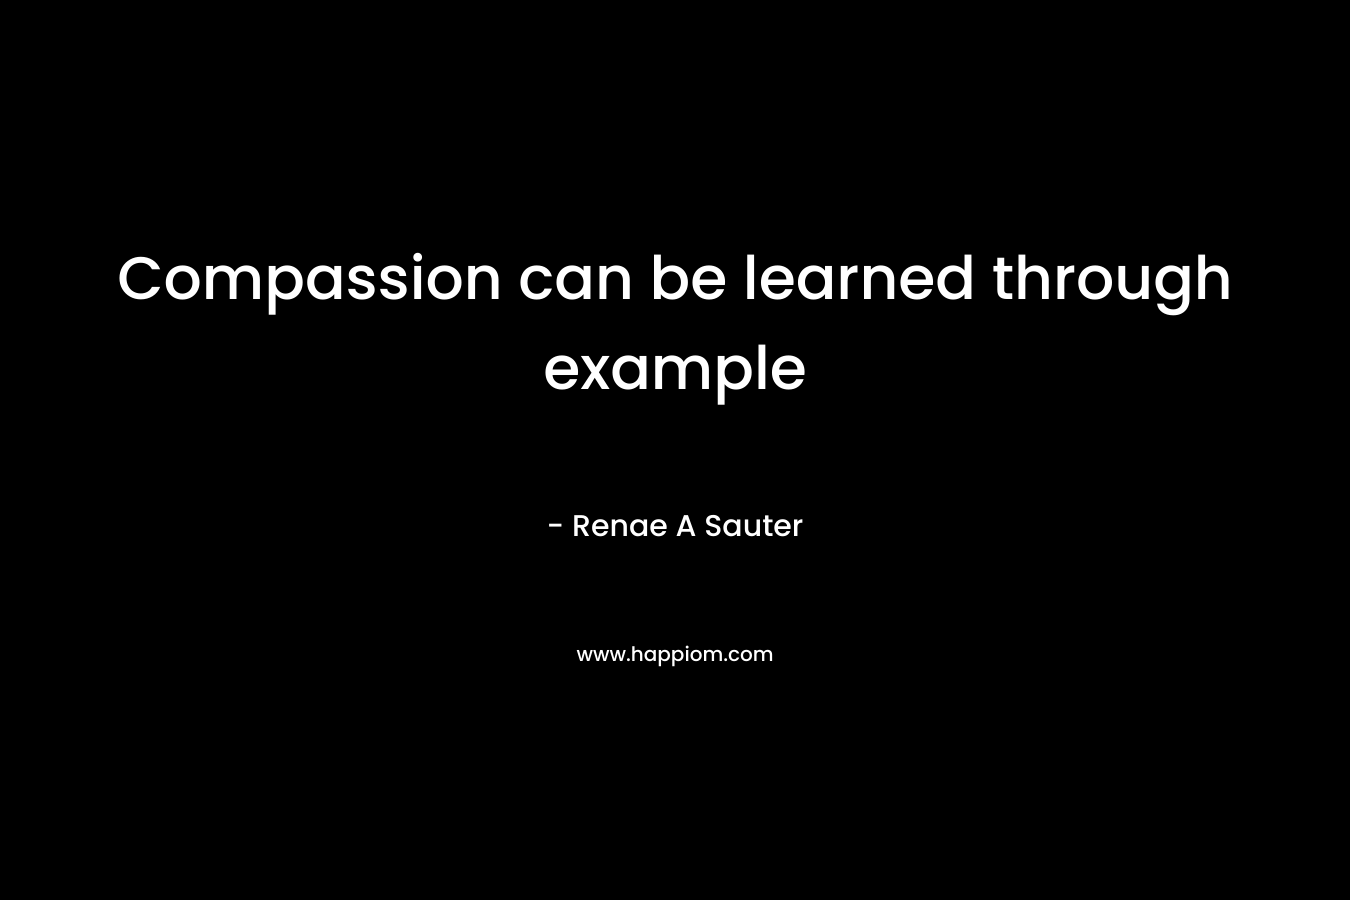 Compassion can be learned through example